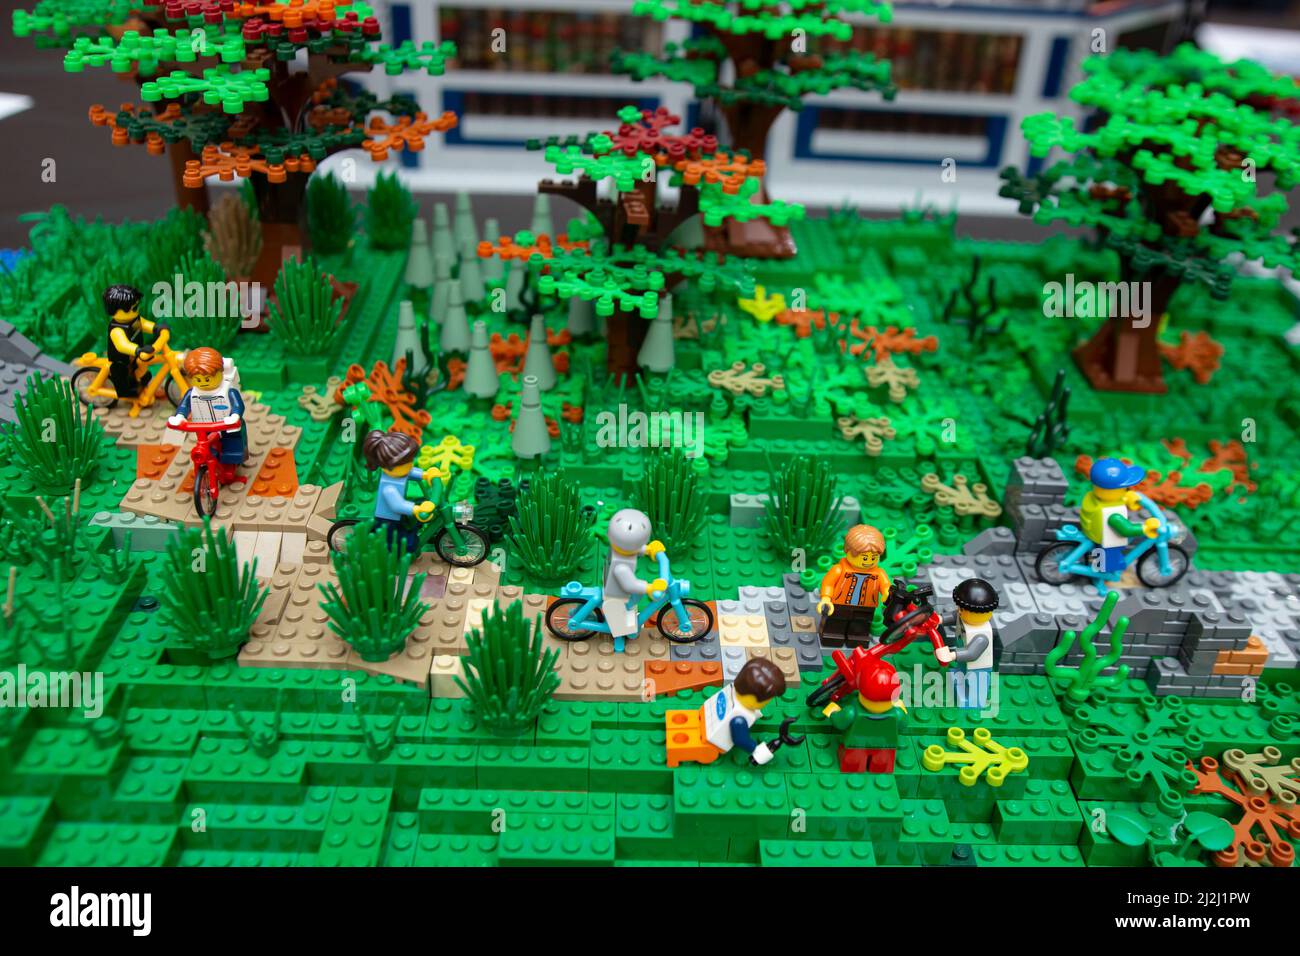 Lego toys scene depicting kids playing in the park, with alleys trees and grass. Stock Photo